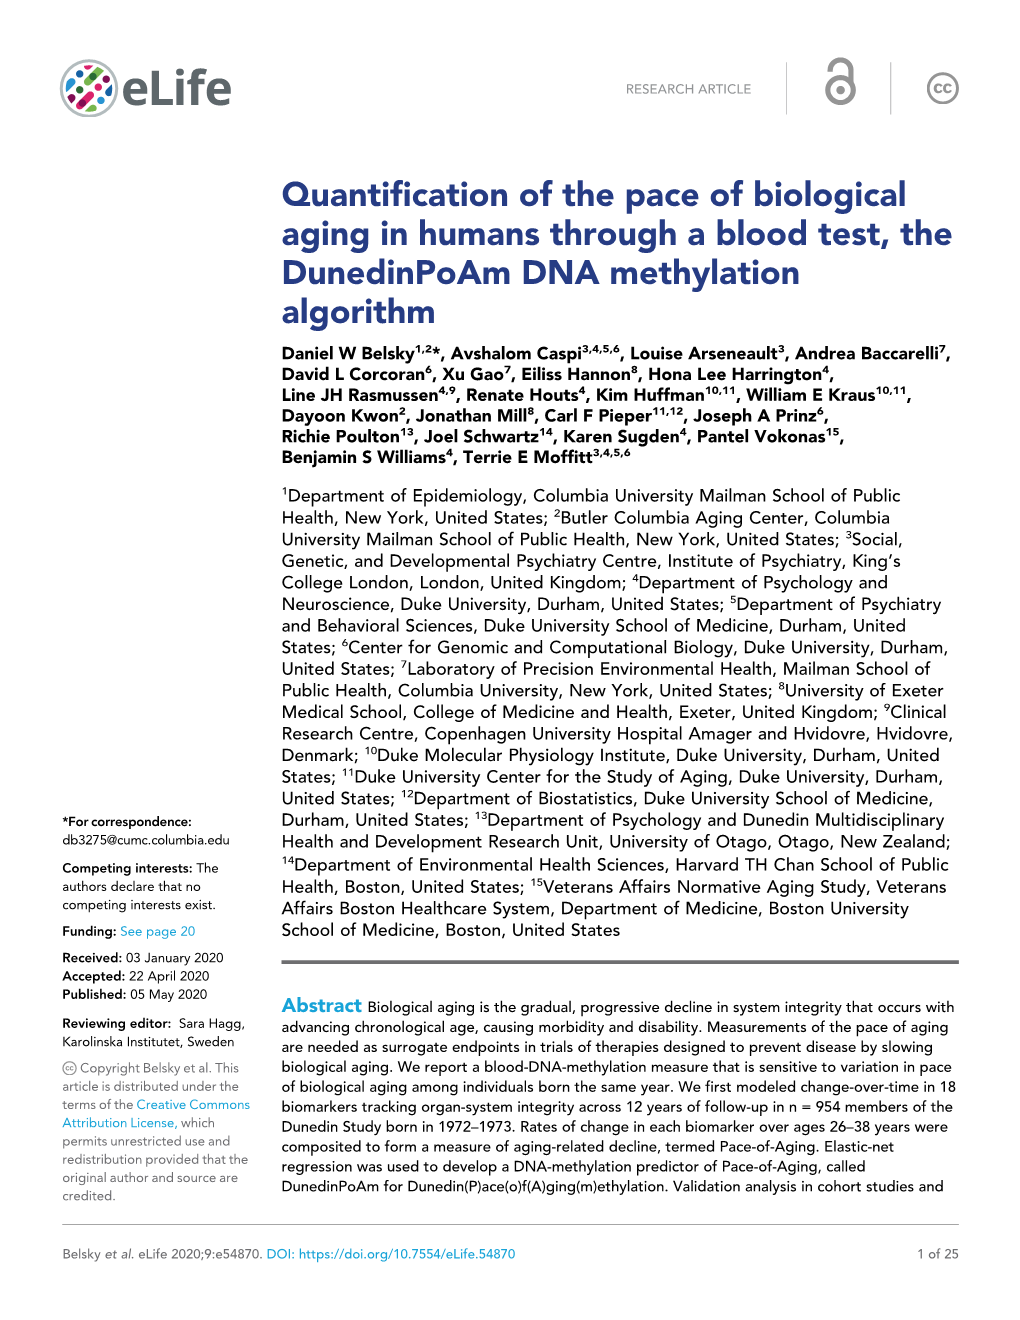 Quantification of the Pace of Biological Aging in Humans Through a Blood